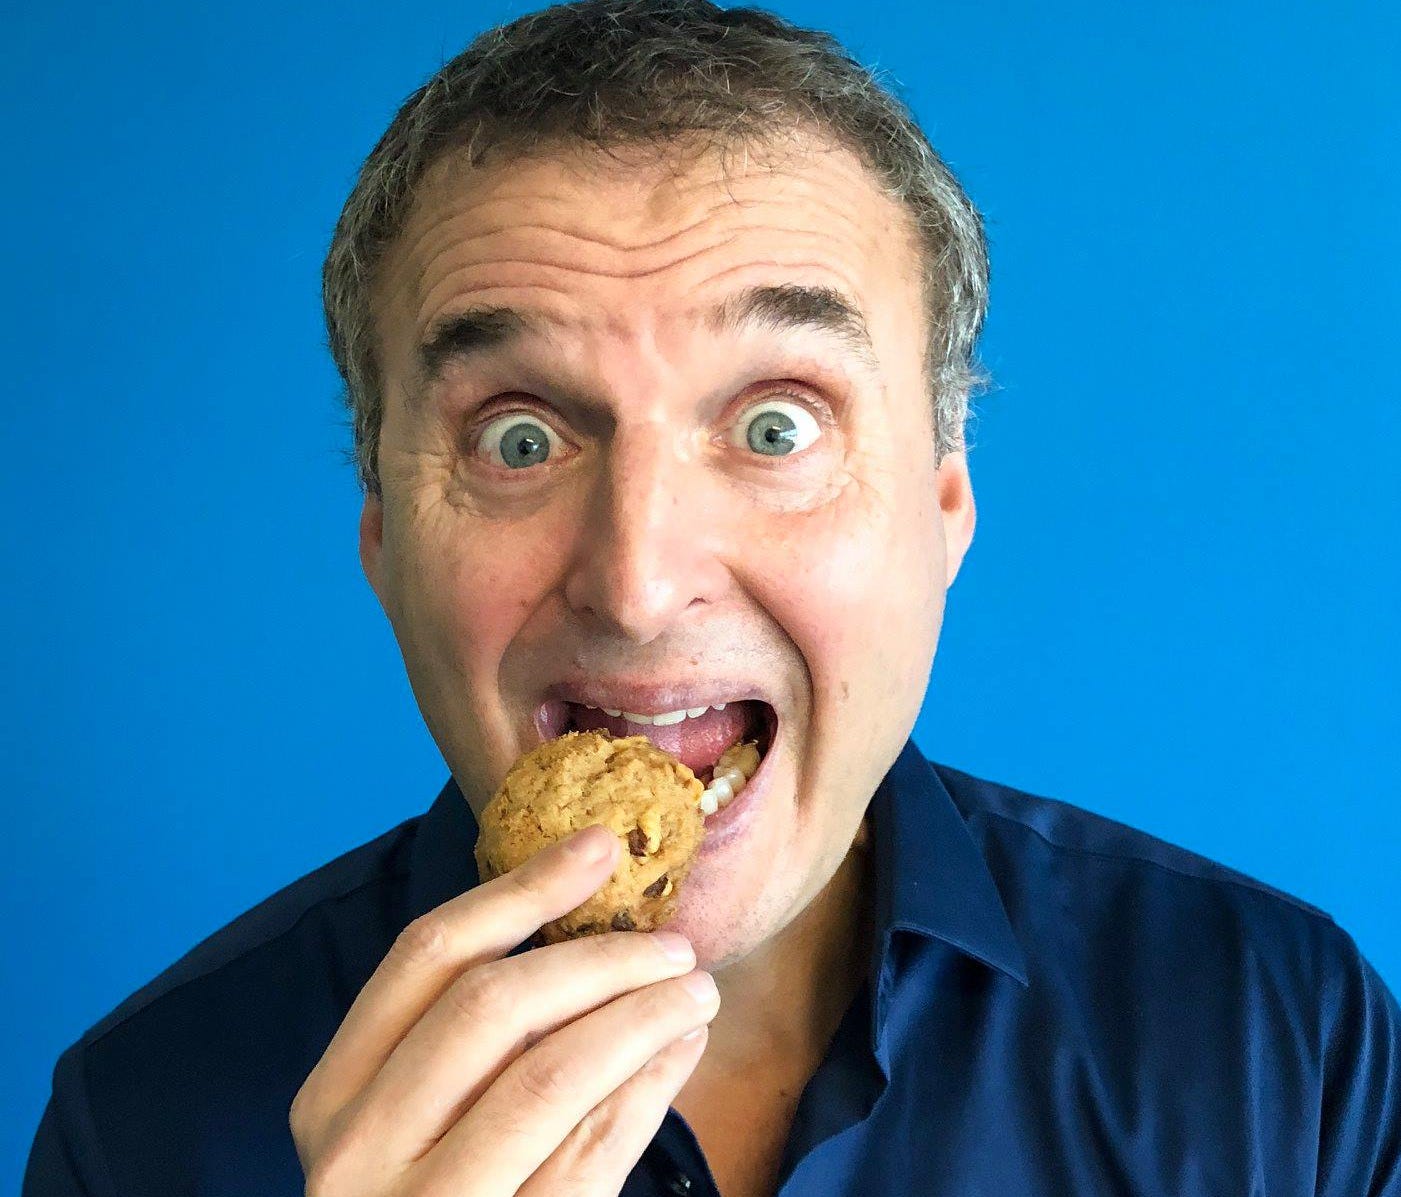 Phil Rosenthal is the producer and host of Netflix's 